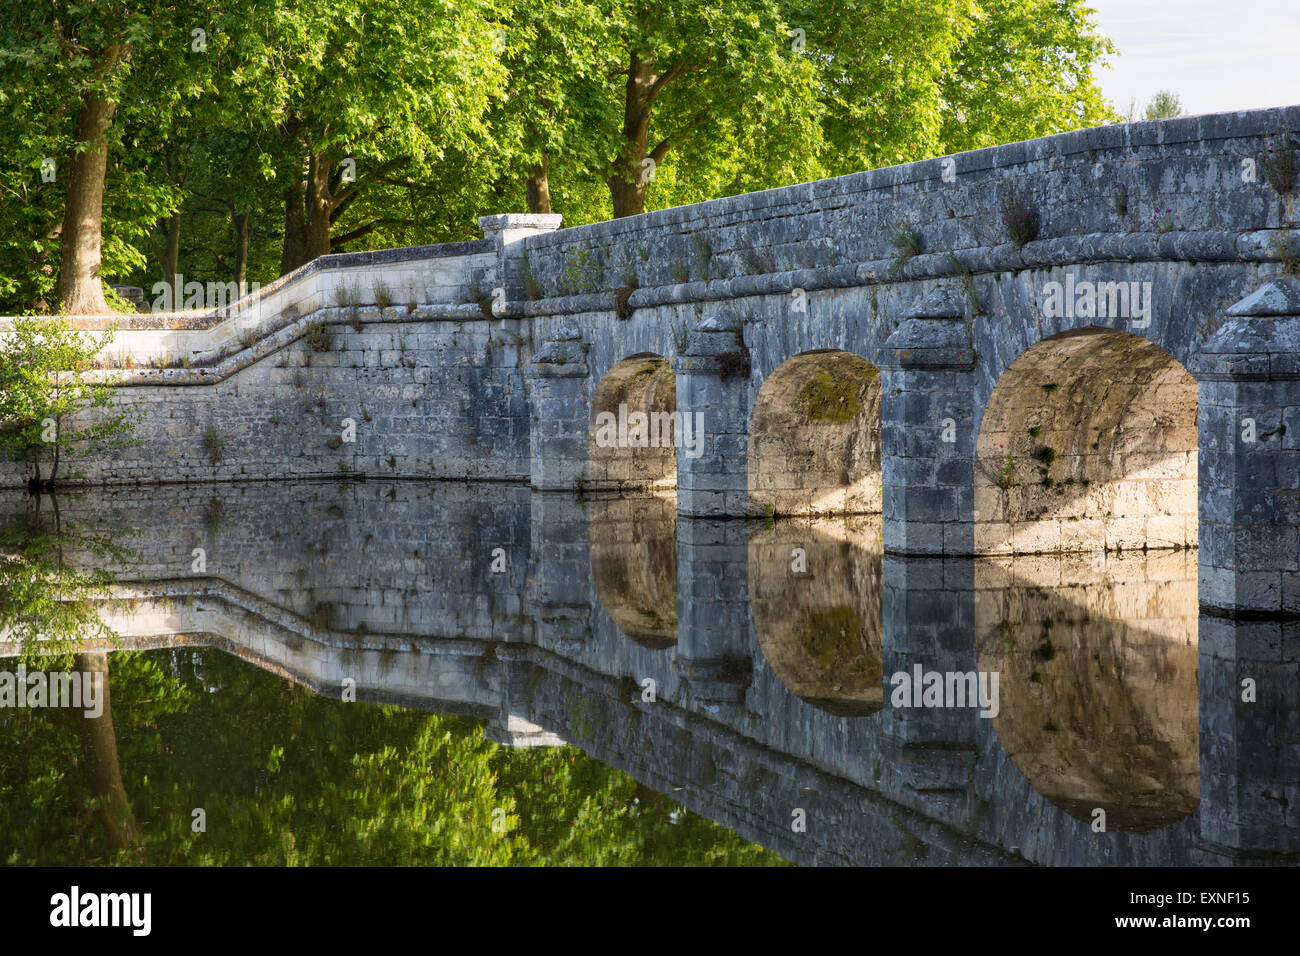 Old stone bridge reflecting in River Cosson at Chateau de Chambord, Loire Valley, France Stock Photo